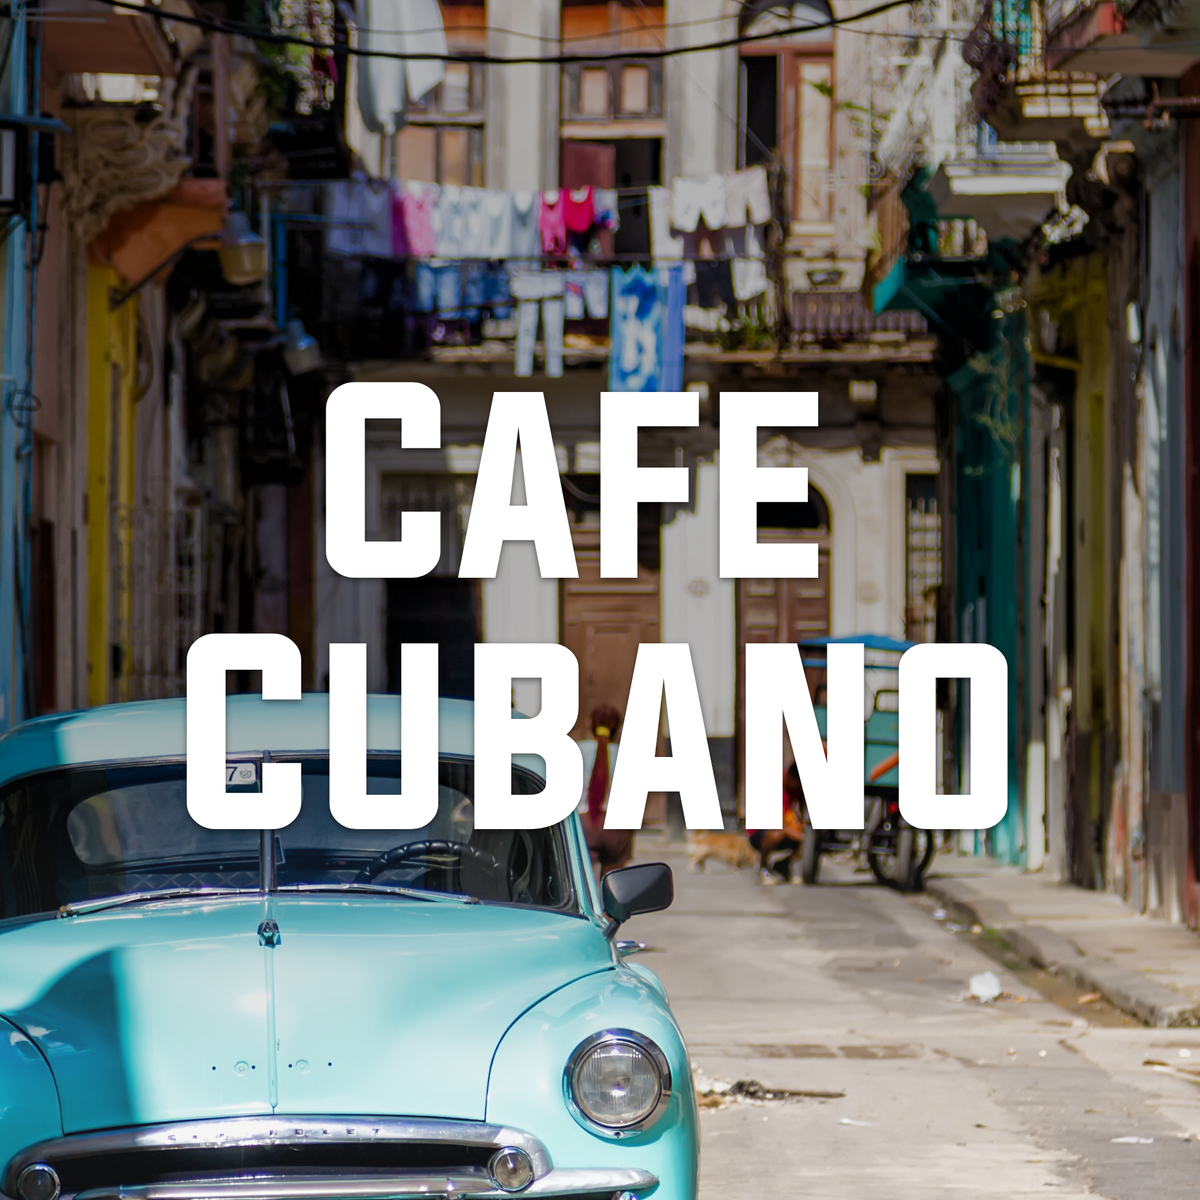 The #1 Authentic Cuban Coffee in Miami